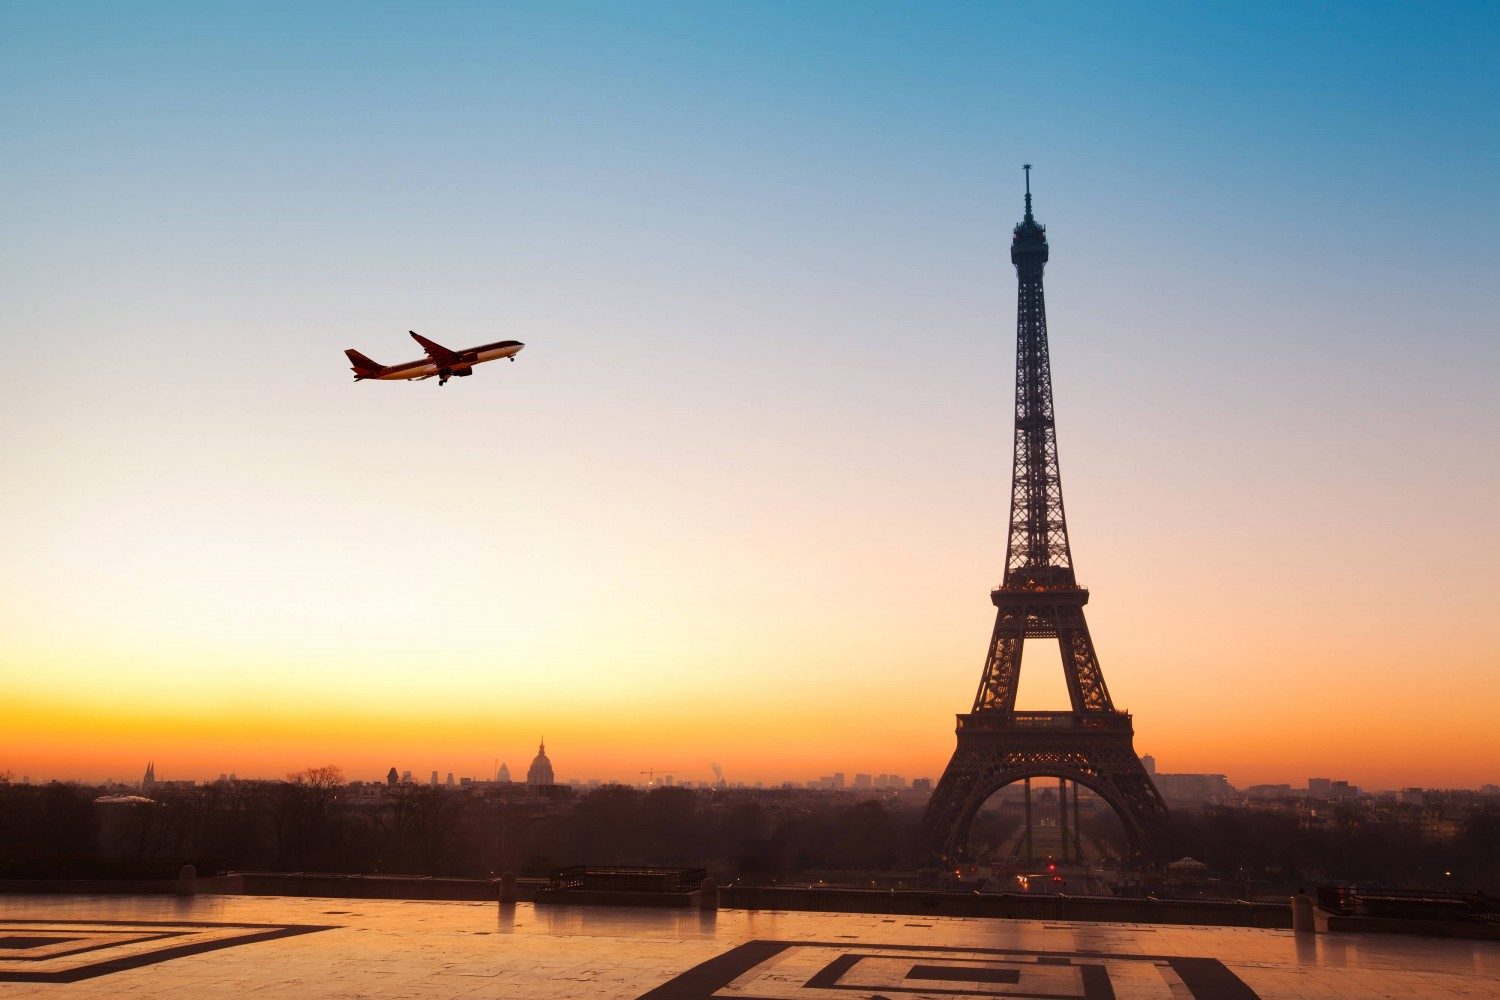 A plane flies in sky in Paris with Eiffel Tower in background